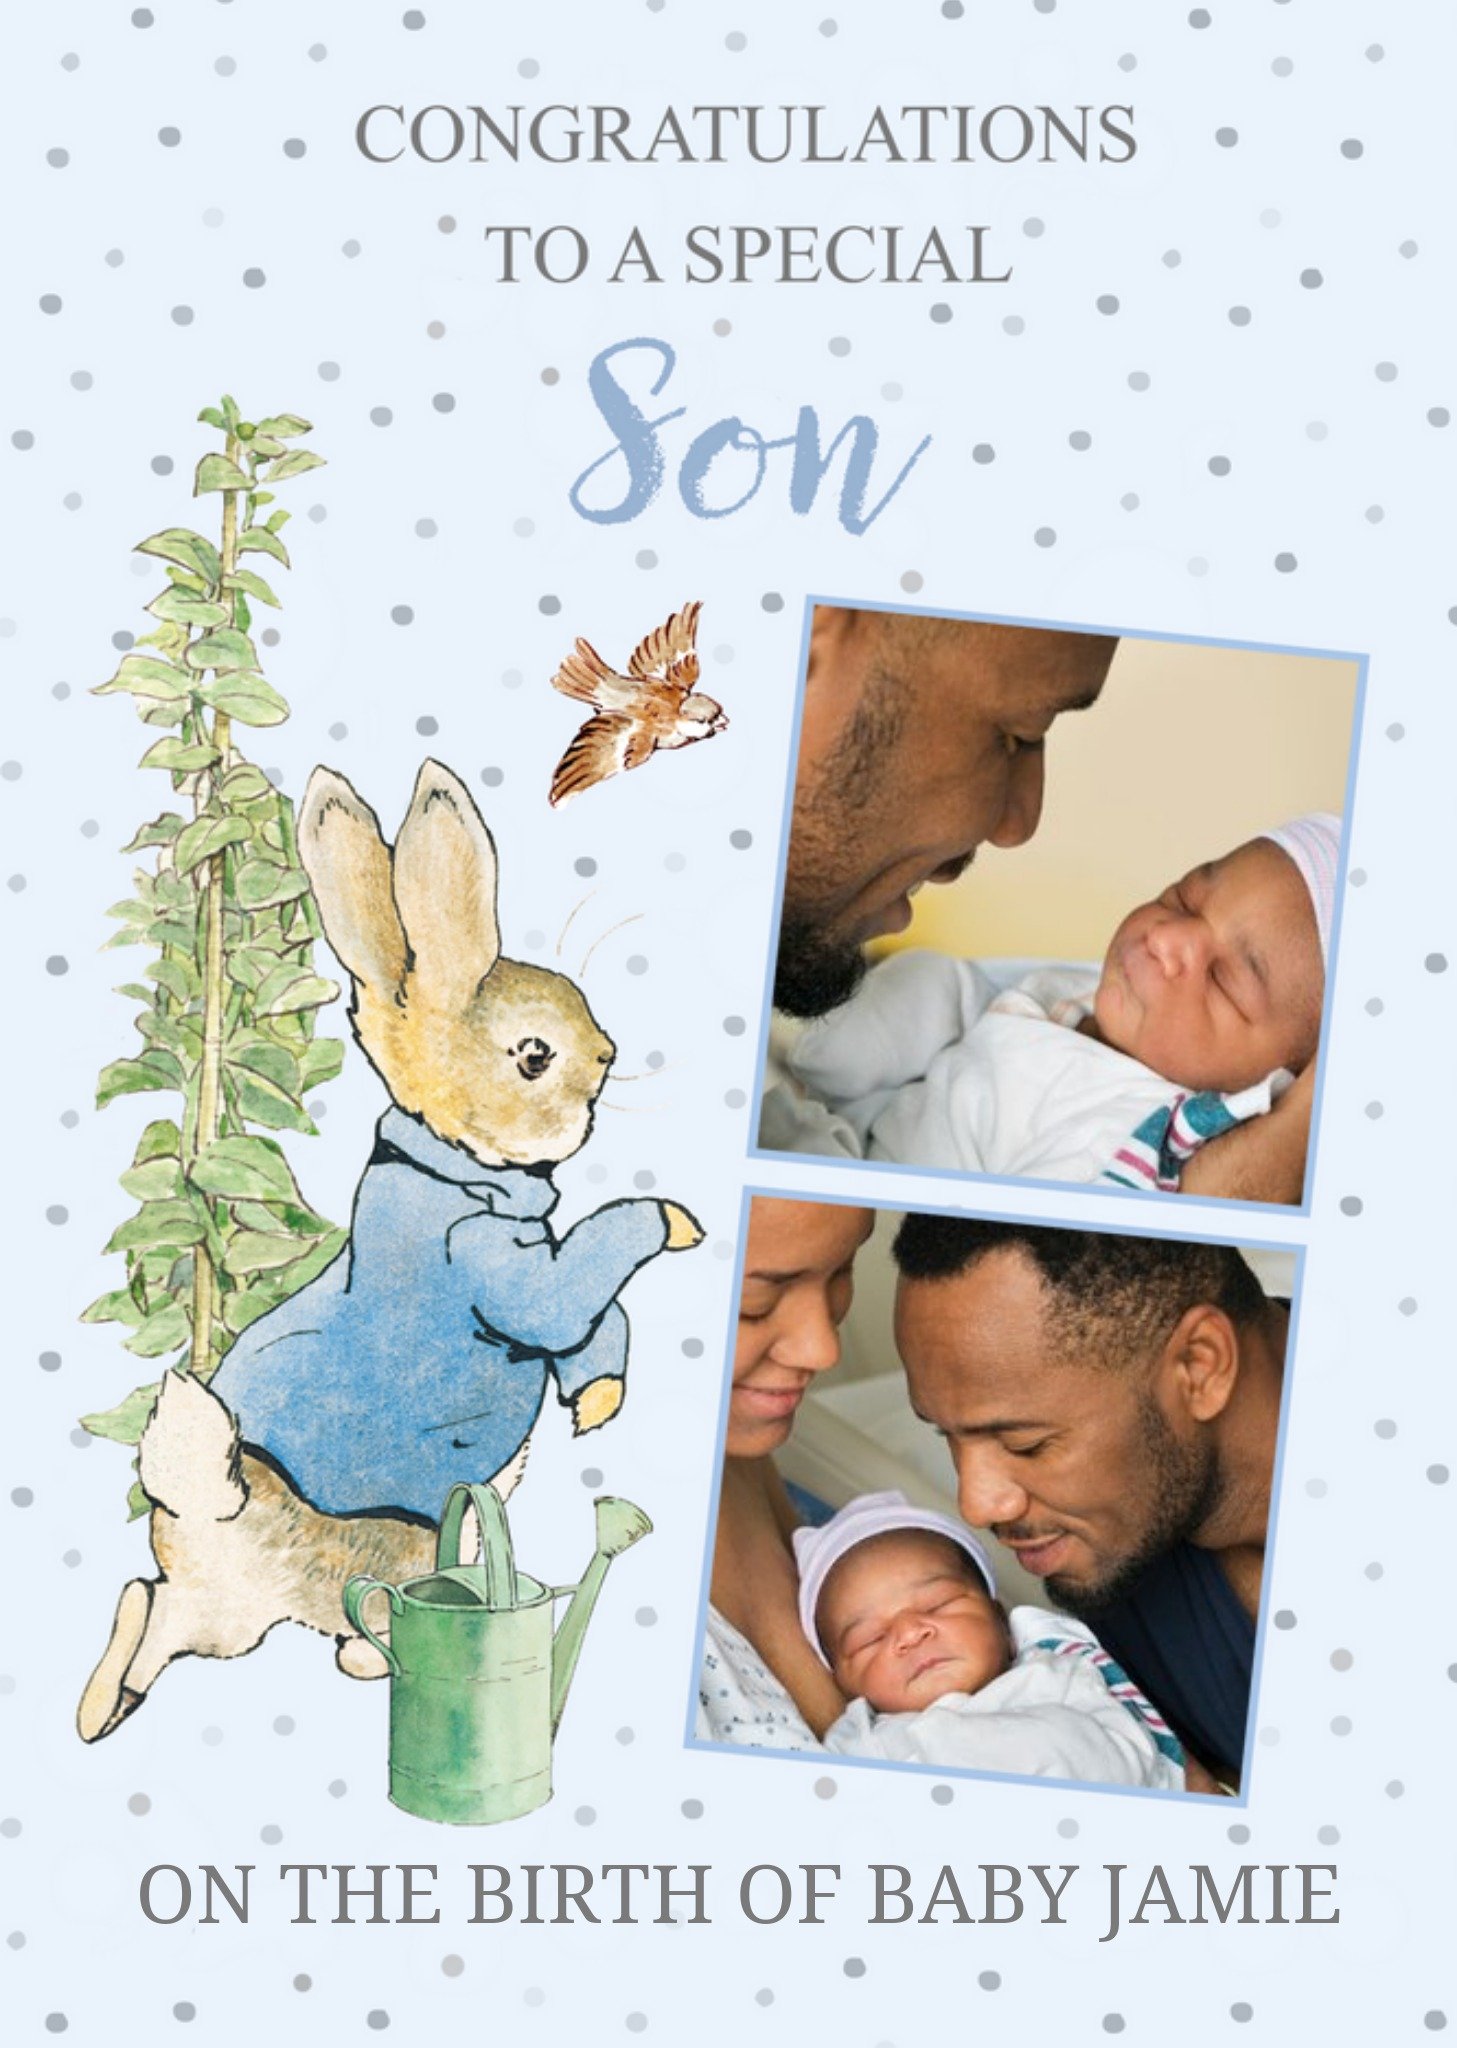 Peter Rabbit Congratulations To A Special Son Photo Upload New Baby Card, Large